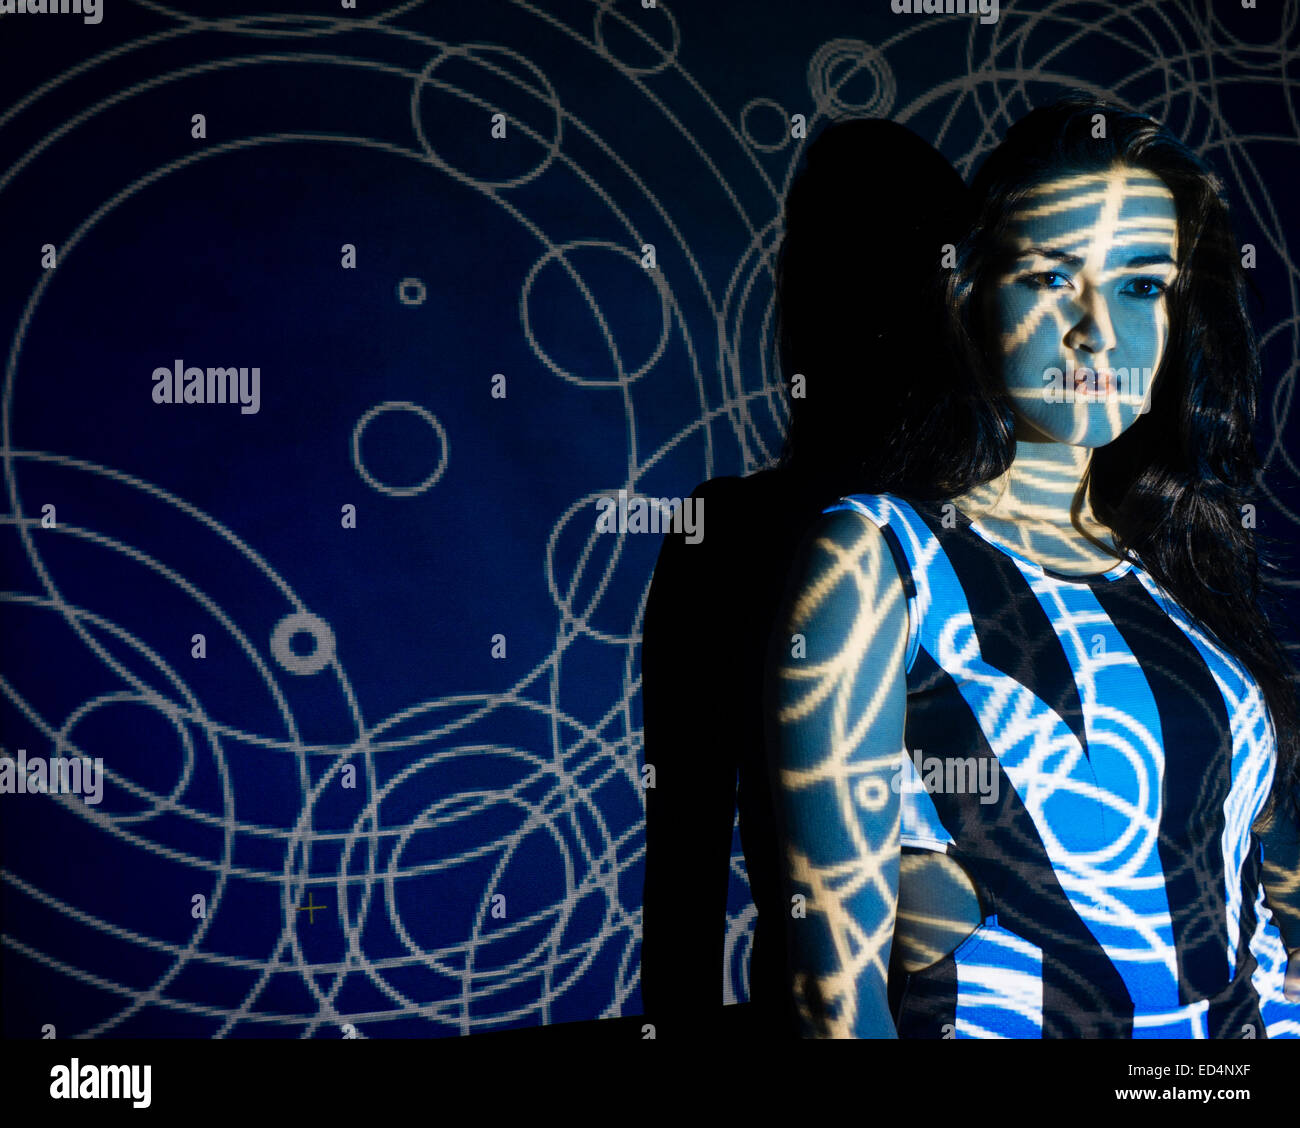 Digital Art: a young woman girl with a swirling spiral digital image pattern projected onto her face. Stock Photo